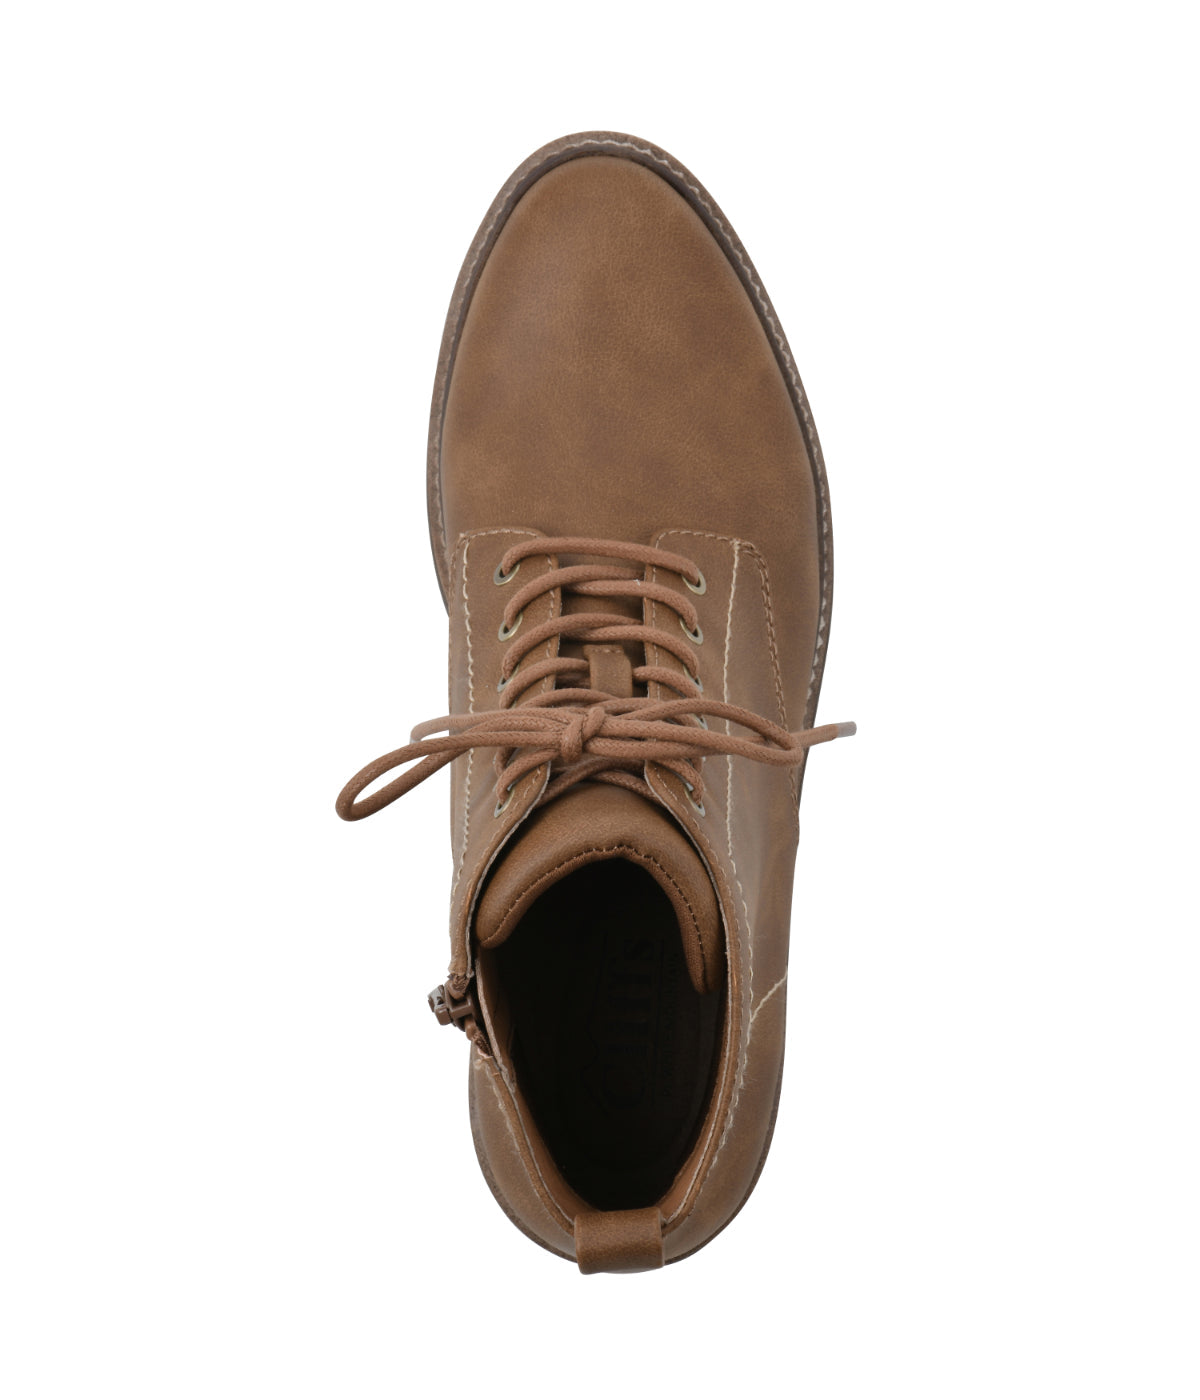 Eligible Lace-up Boots Tan/Nubuck